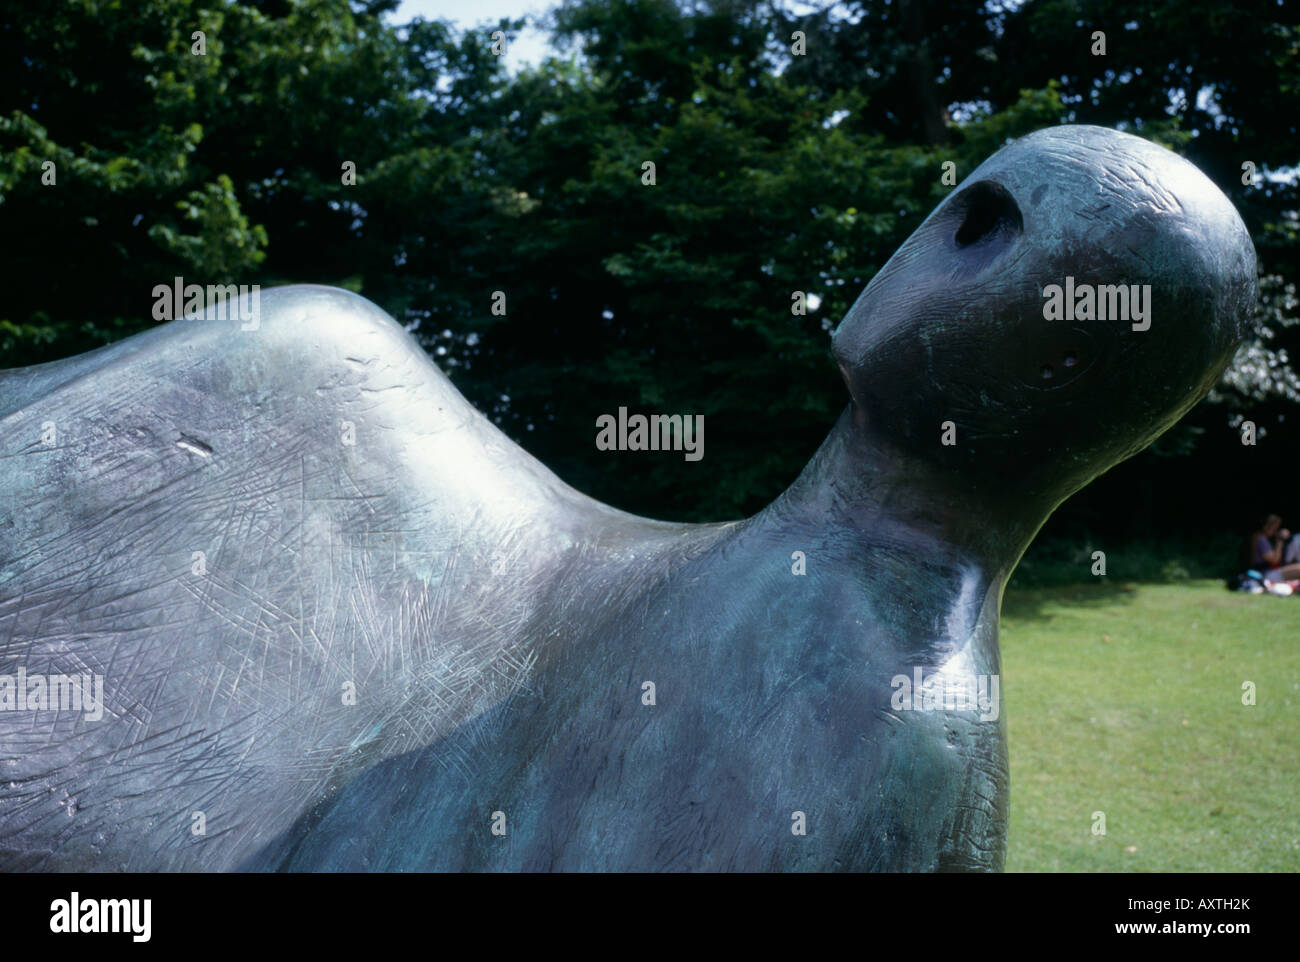 A Henry Moore reclining figure bronze sculpture at Perry Green gardens in Hertfordshire England UK Stock Photo